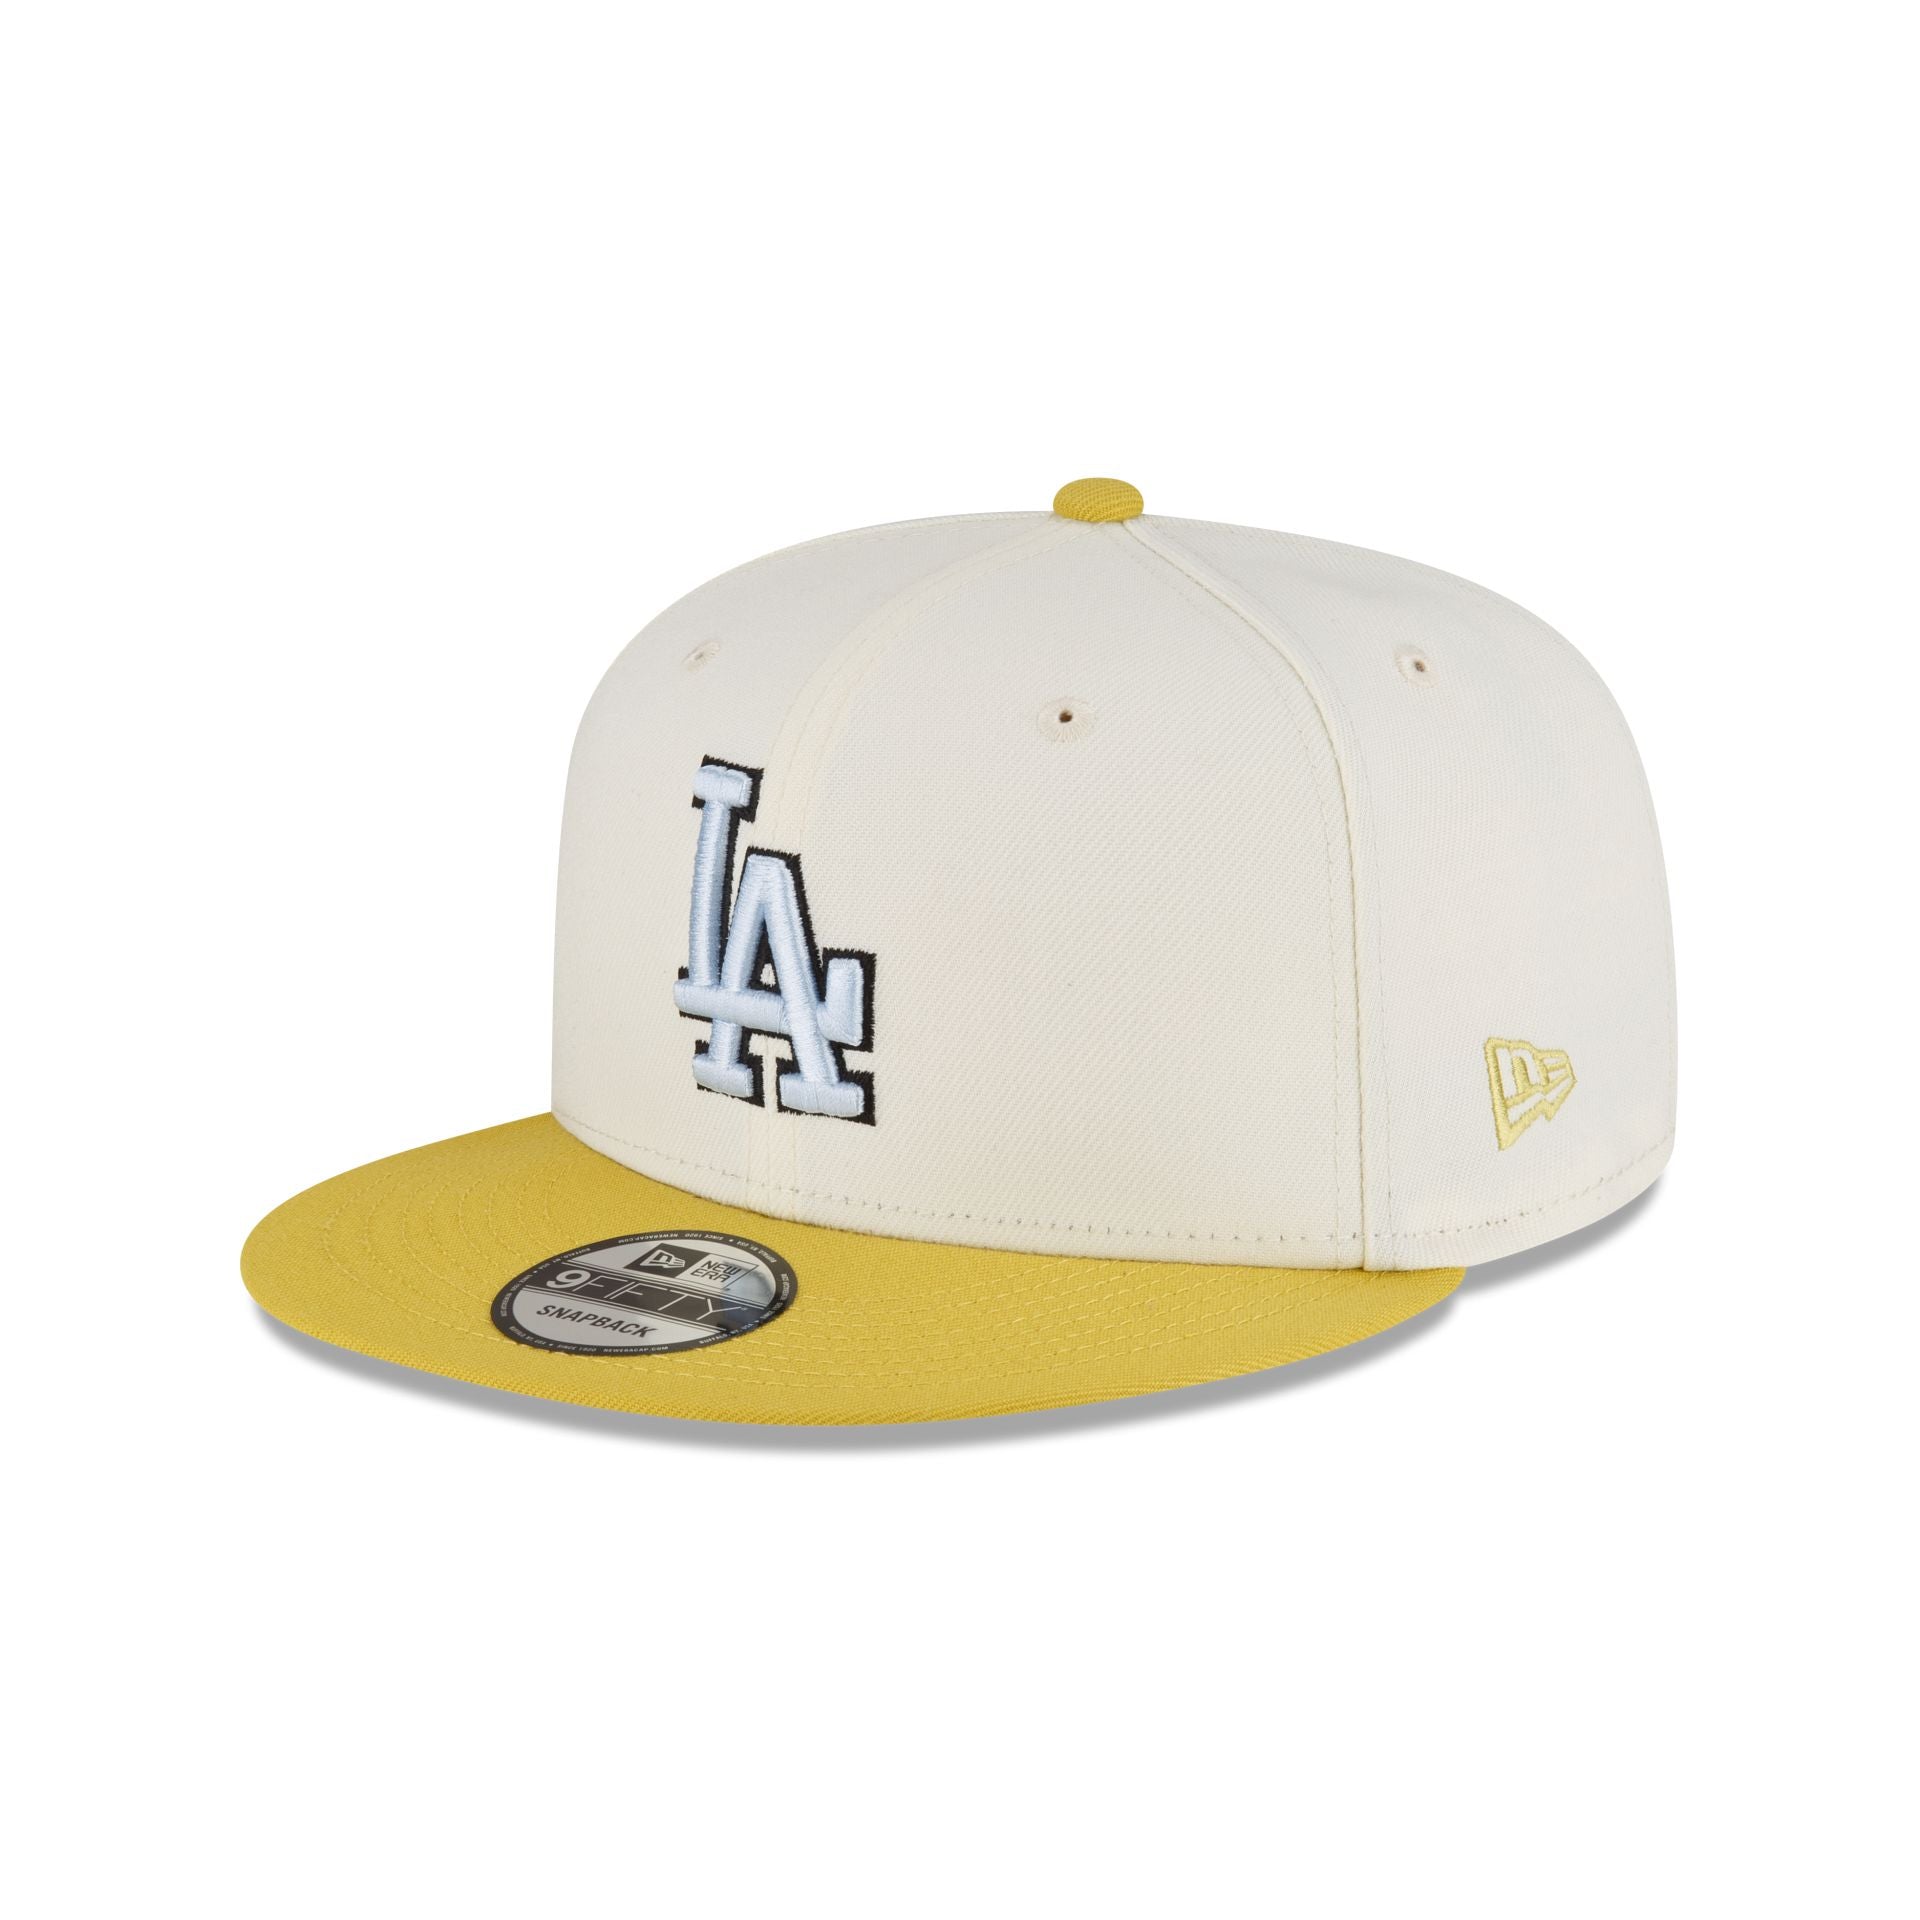 Los Angeles Dodgers Sepia Retro Crown 9FIFTY Snapback Hat – New